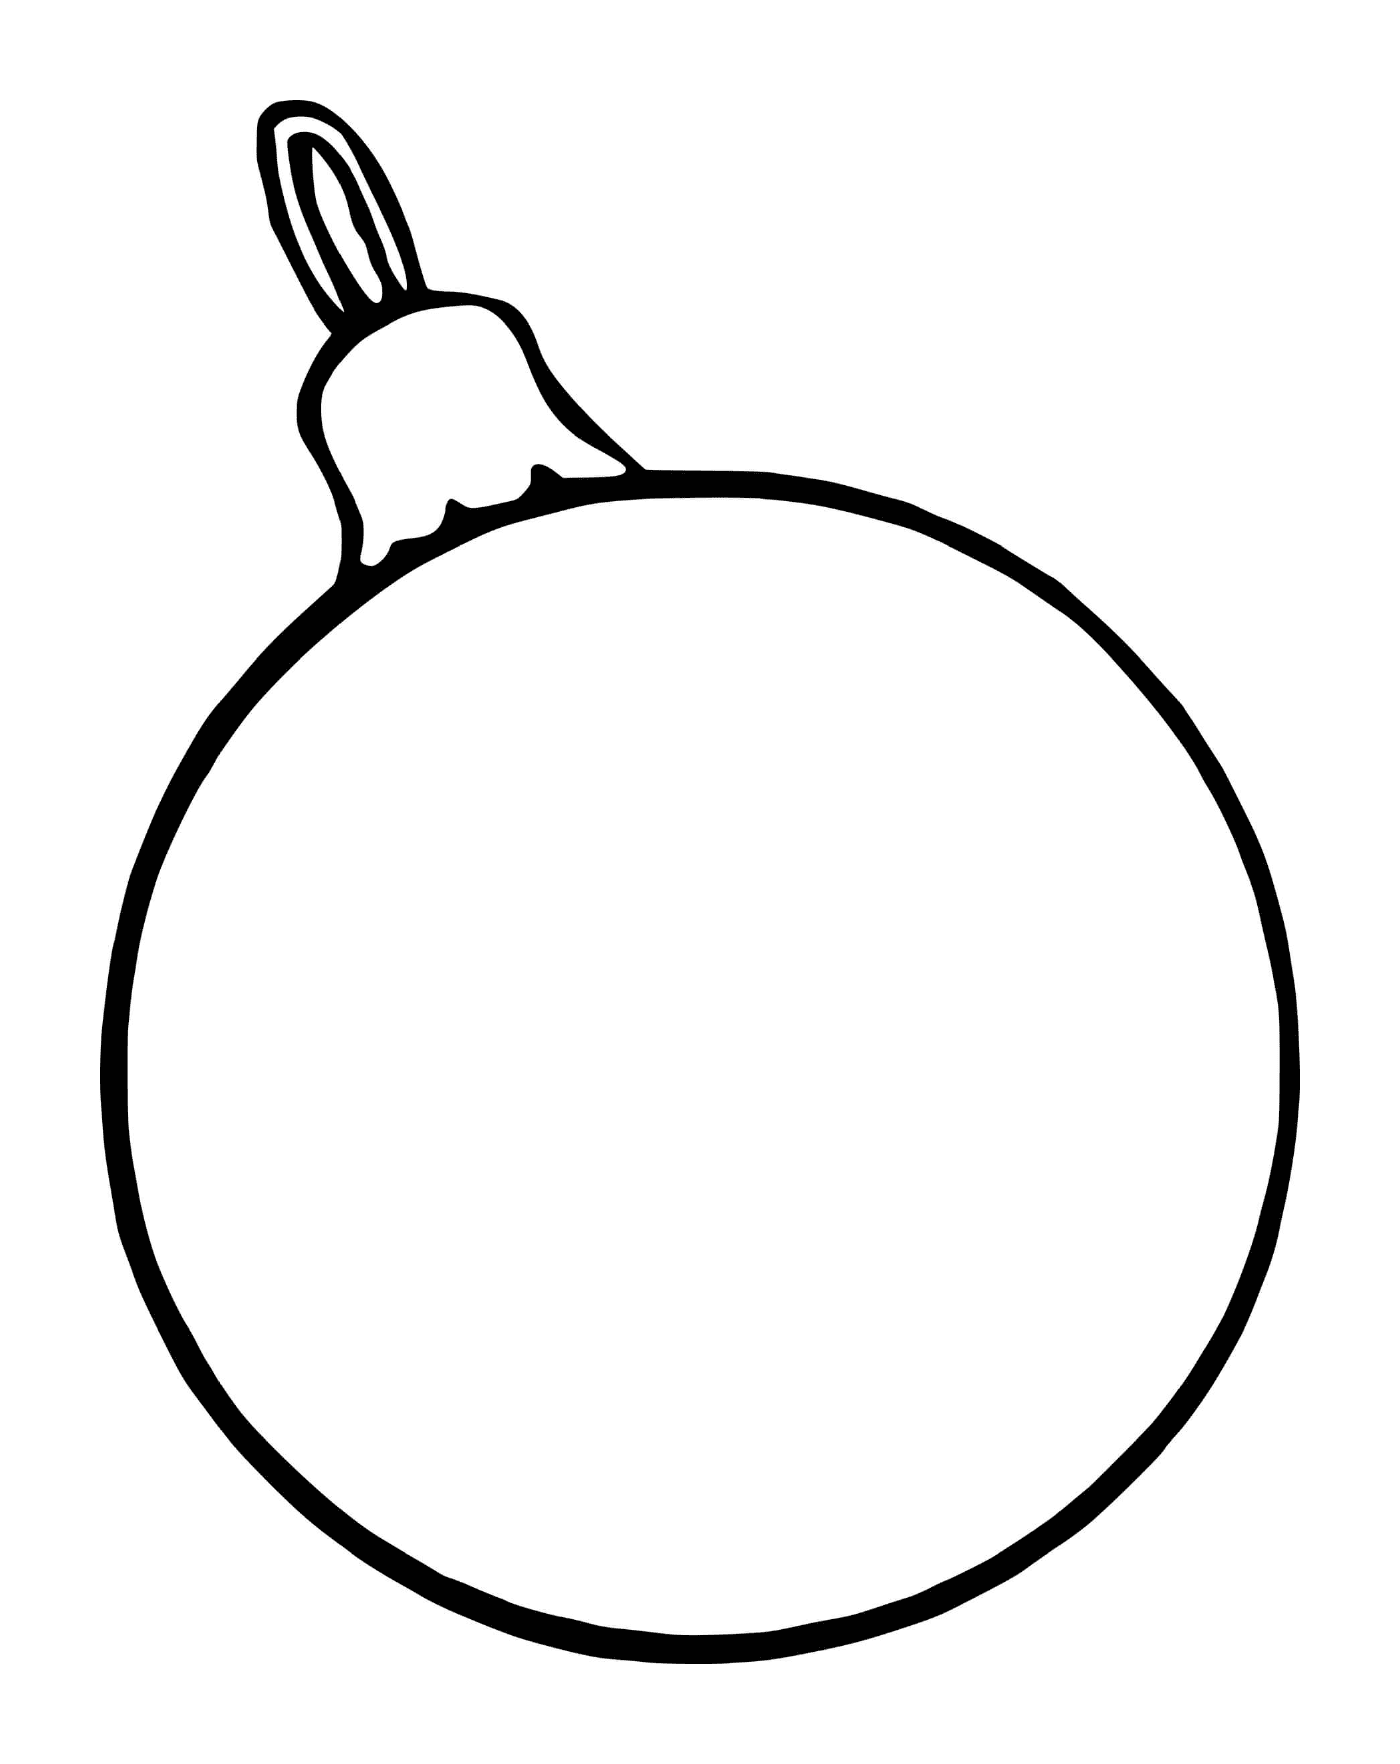  A simple Christmas ball for a tree with an apple placed on an oval fruit 